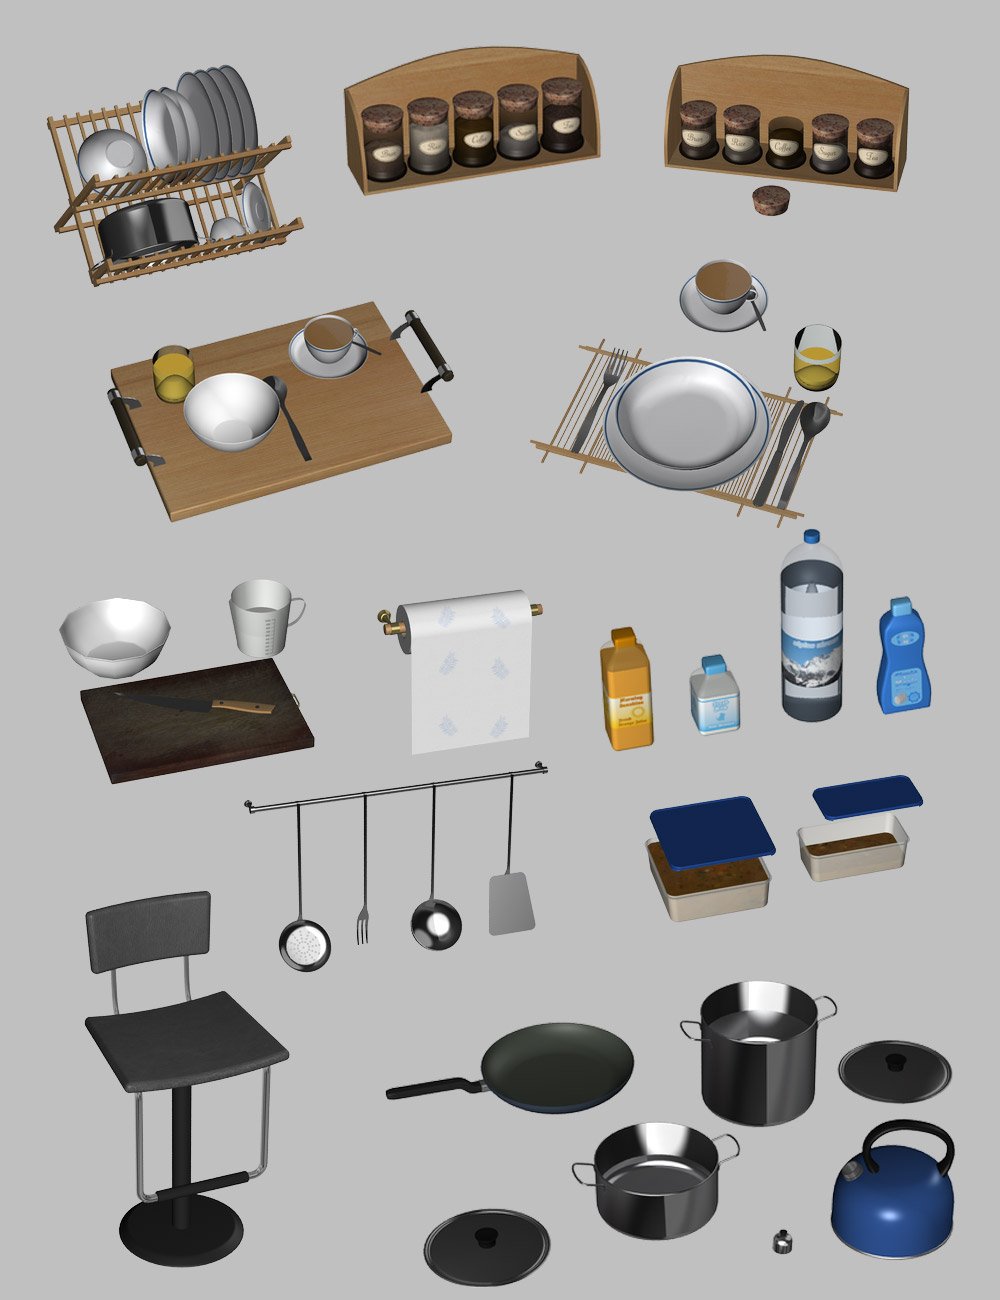 Home One Kitchen by: maclean, 3D Models by Daz 3D